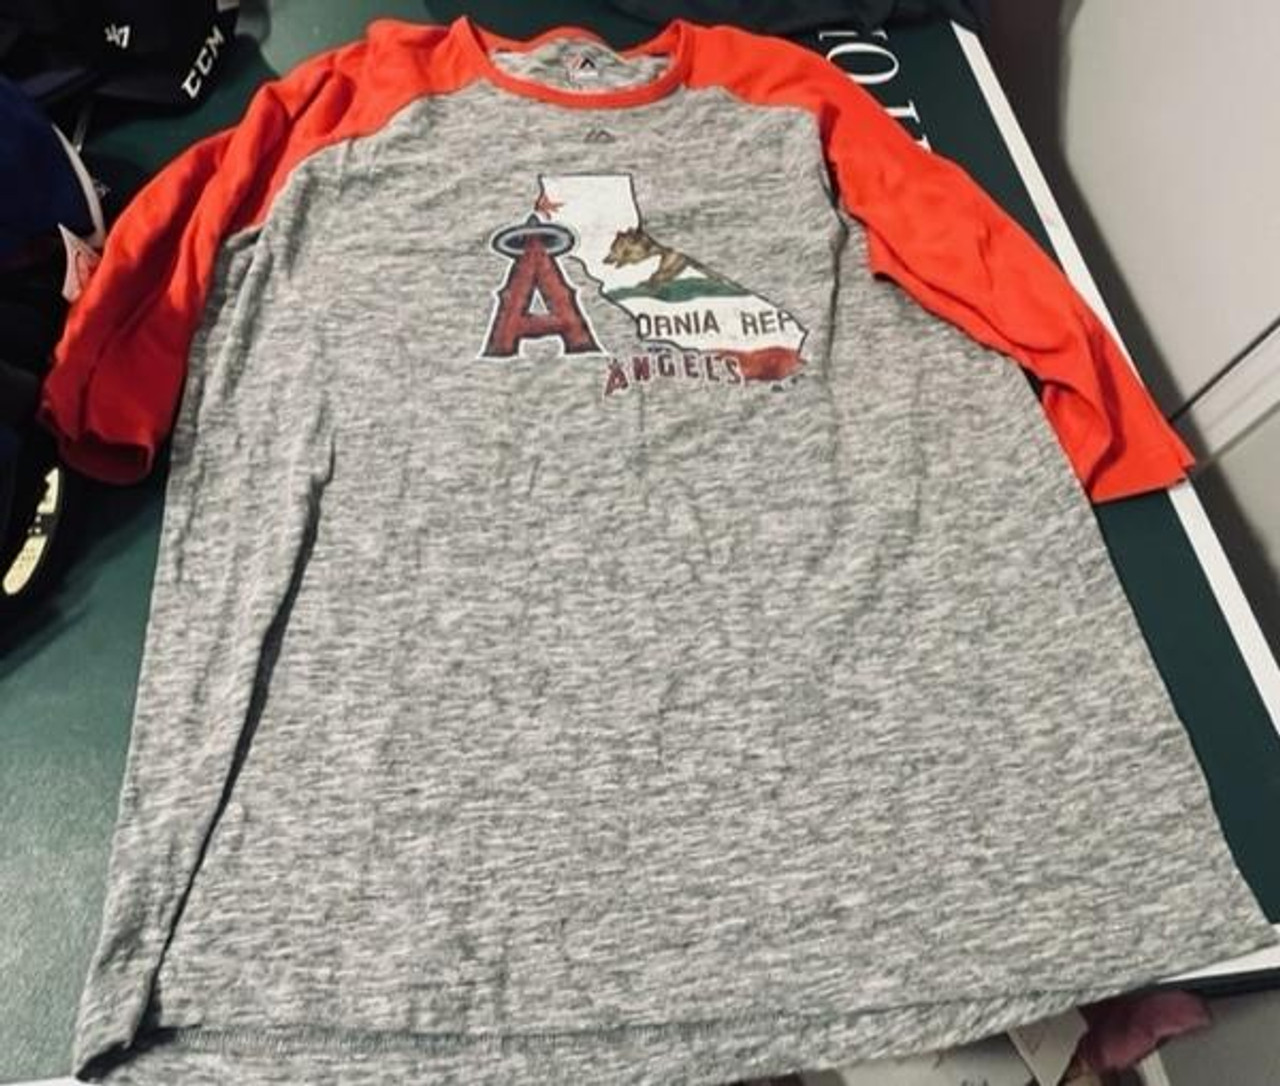 Cheap Los Angeles Angels Apparel, Discount Angels Gear, MLB Angels  Merchandise On Sale